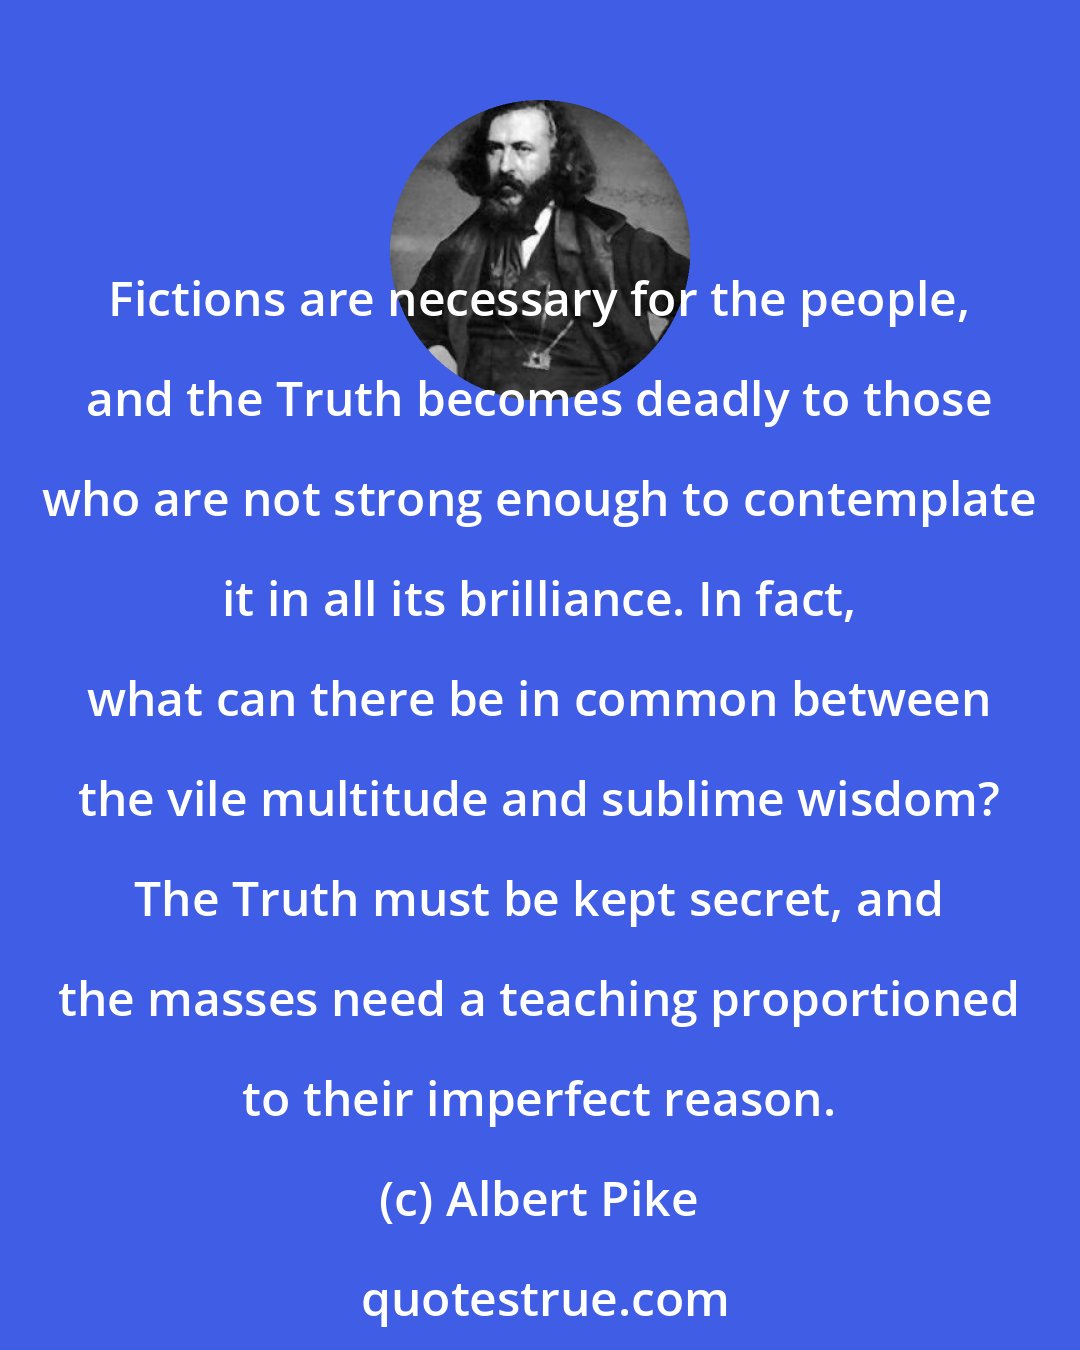 Albert Pike: Fictions are necessary for the people, and the Truth becomes deadly to those who are not strong enough to contemplate it in all its brilliance. In fact, what can there be in common between the vile multitude and sublime wisdom? The Truth must be kept secret, and the masses need a teaching proportioned to their imperfect reason.